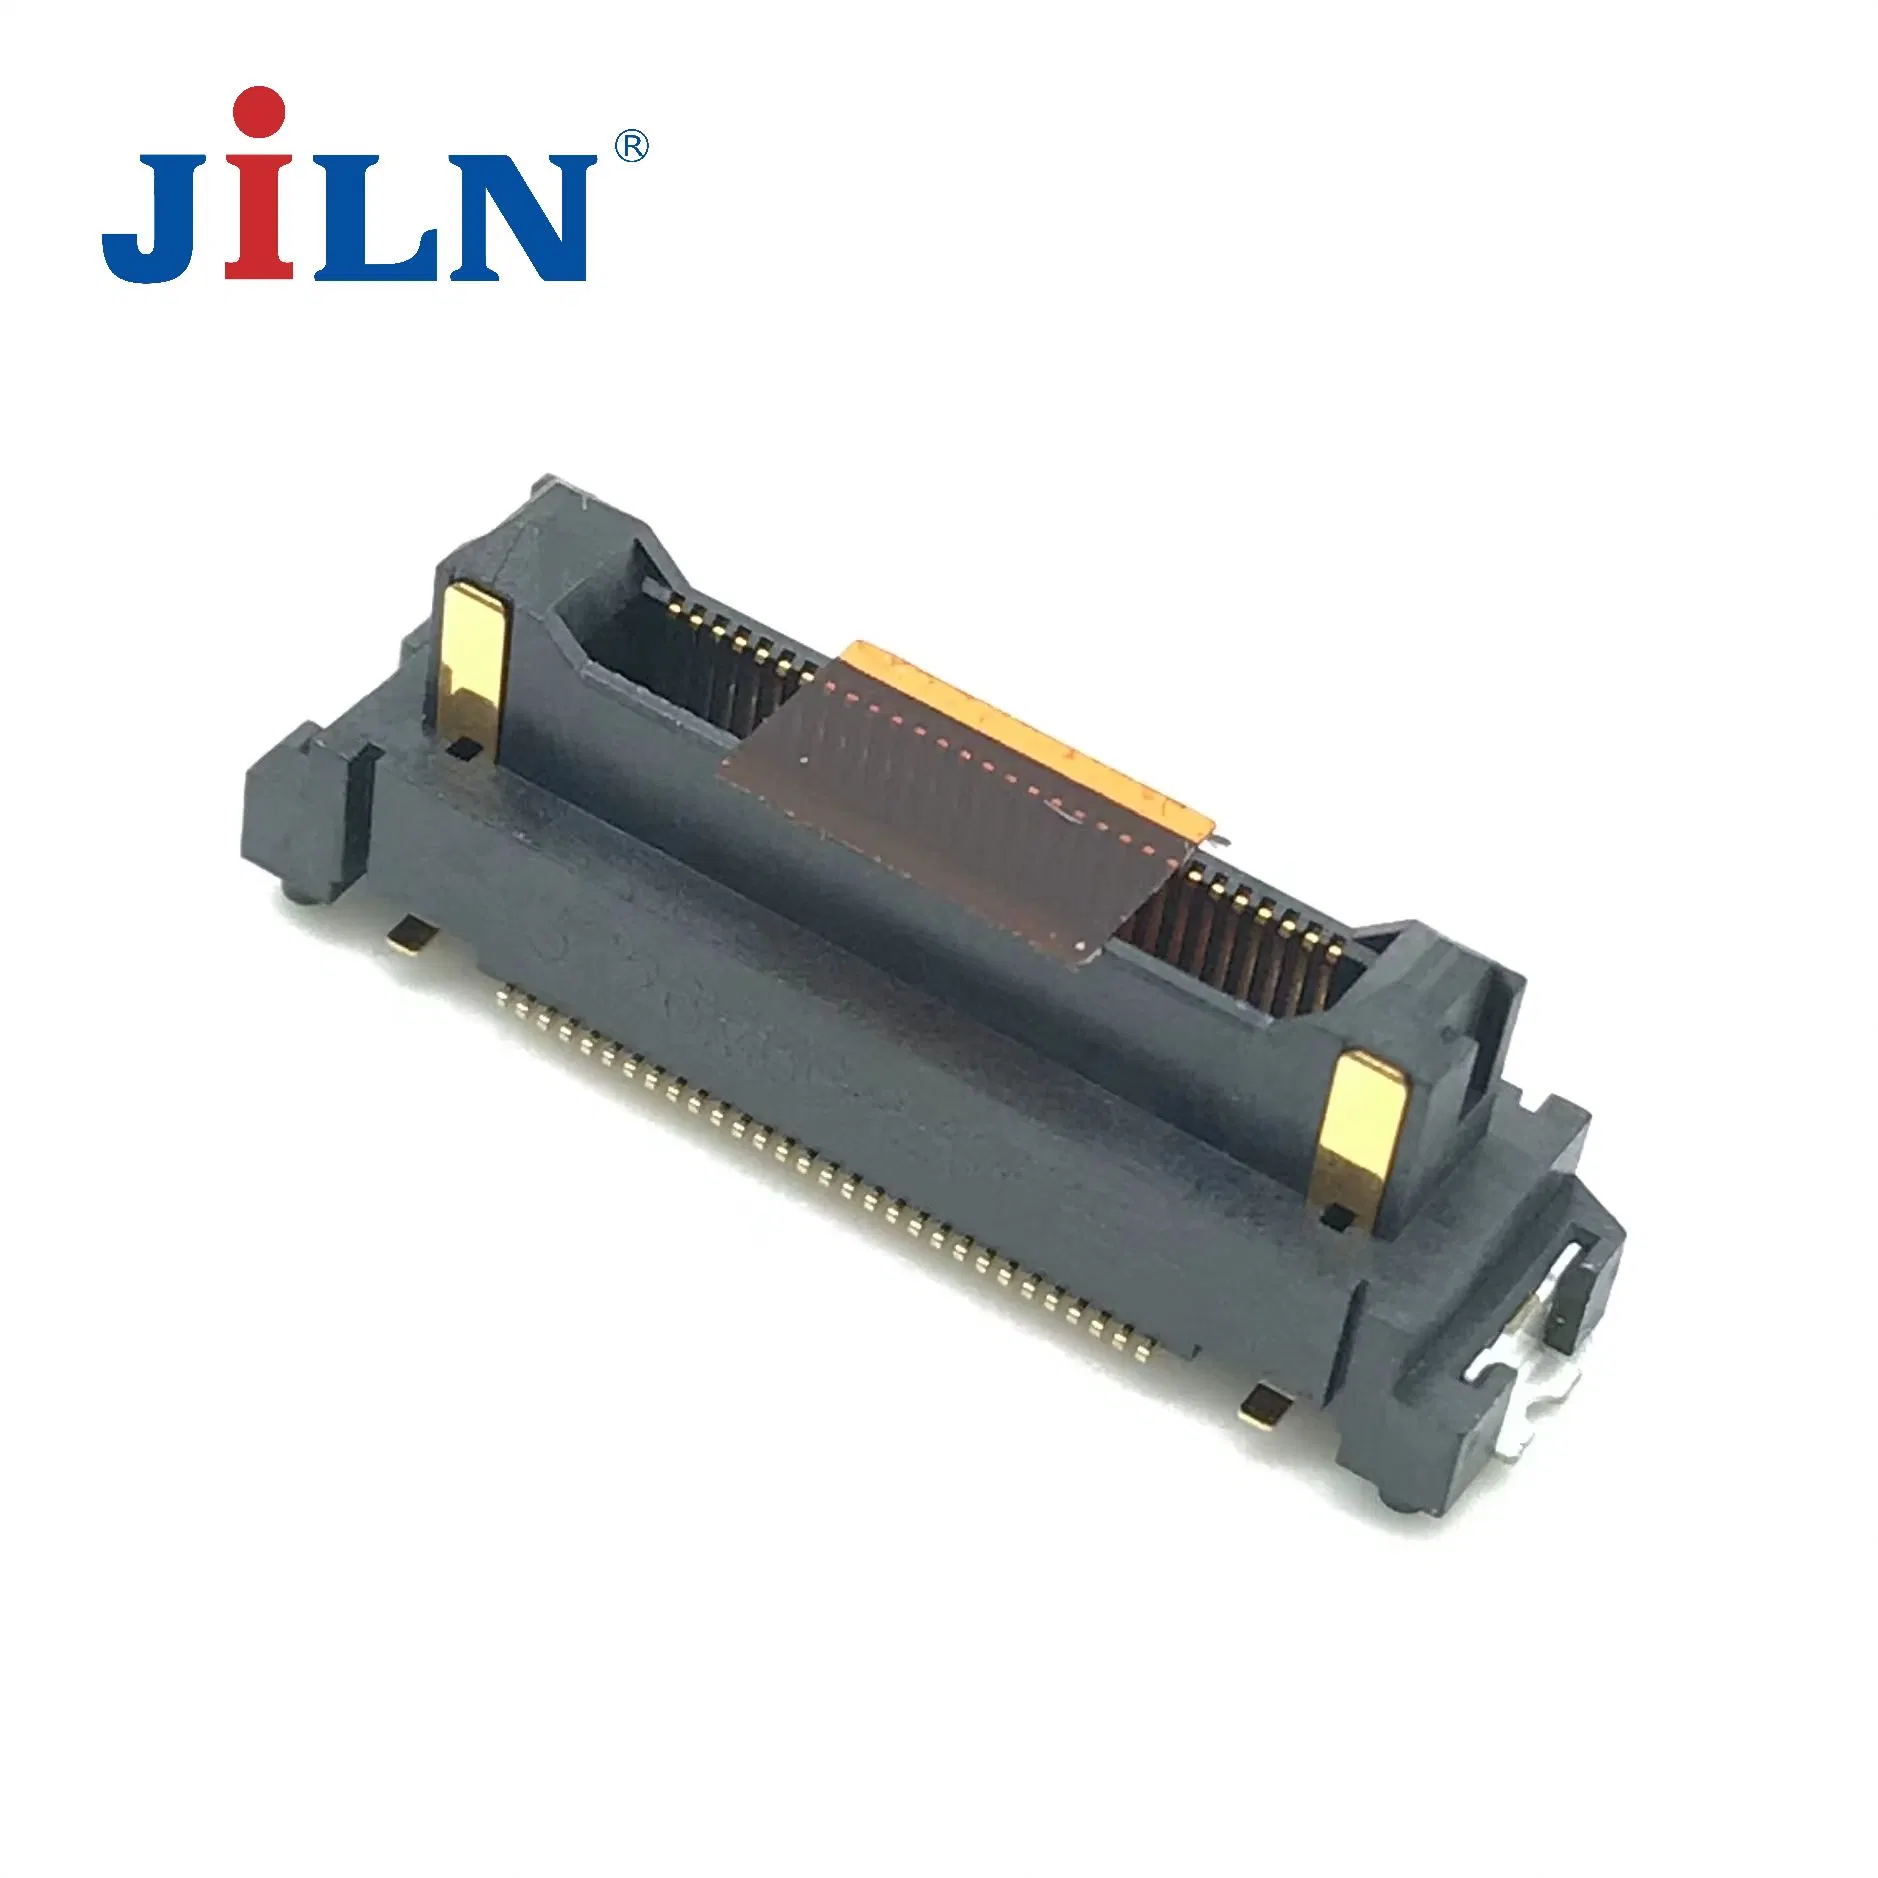 Jiln 0.635mm Board to Board Connector Common Type Female H6.2 PLC30p LED Connector